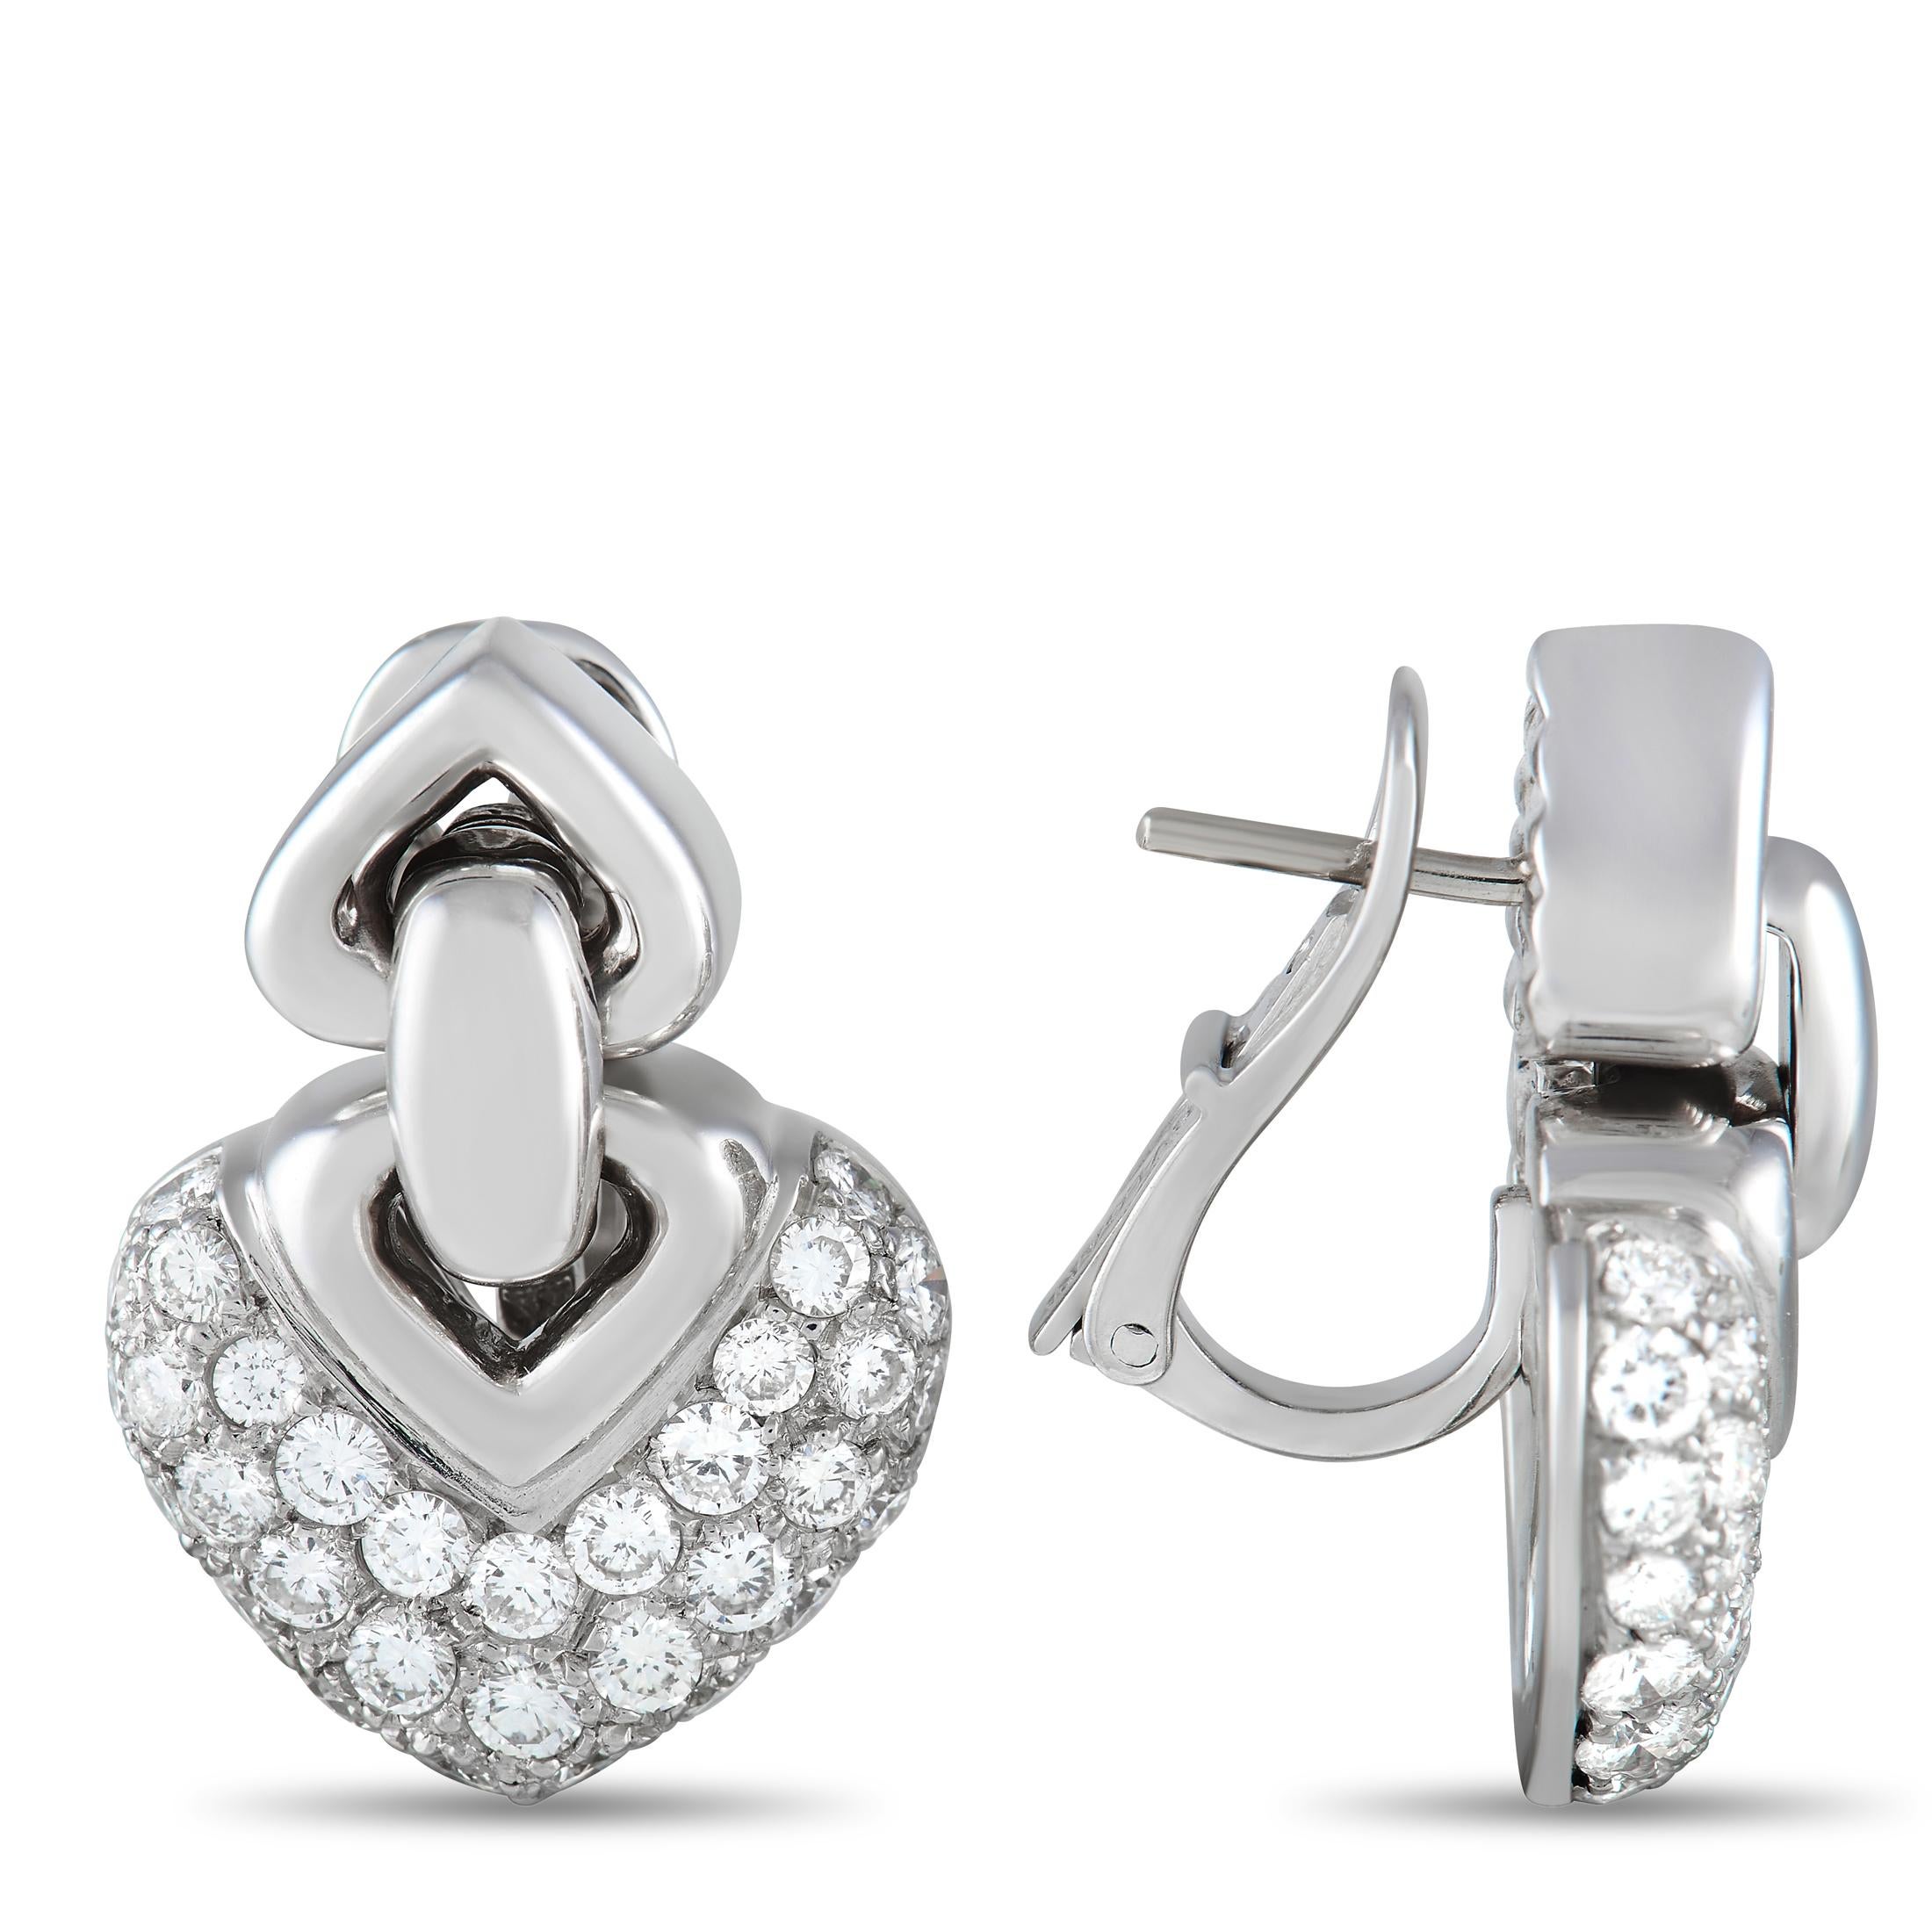 These Bvlgari Doppio Cuore earrings feature a dangling heart-shaped motif covered in pavé diamonds totaling 2.25 carats. Stylish and sophisticated in design, they’re crafted from 18K White Gold for a touch of extra shimmer. Each one measures 1.0”